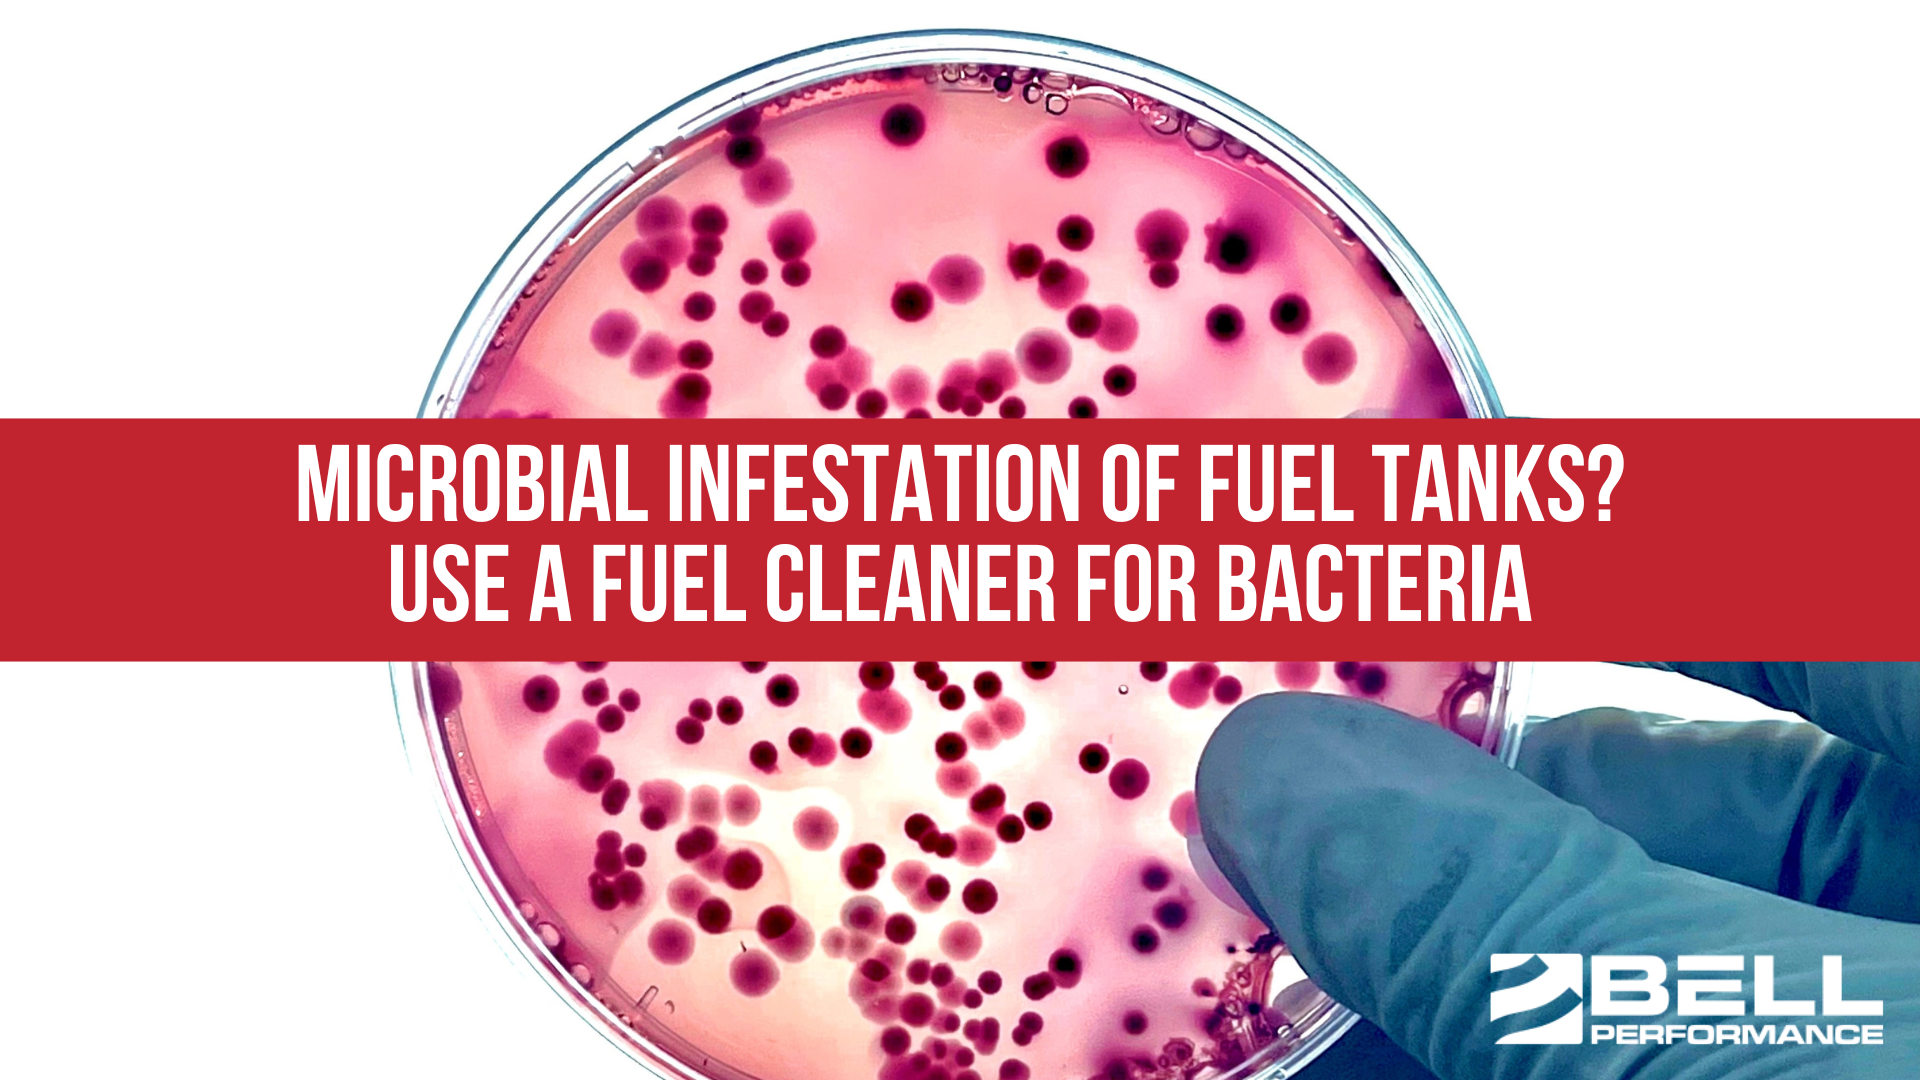 Microbial Infestation of Fuel Tanks? Use a Fuel Cleaner for Bacteria